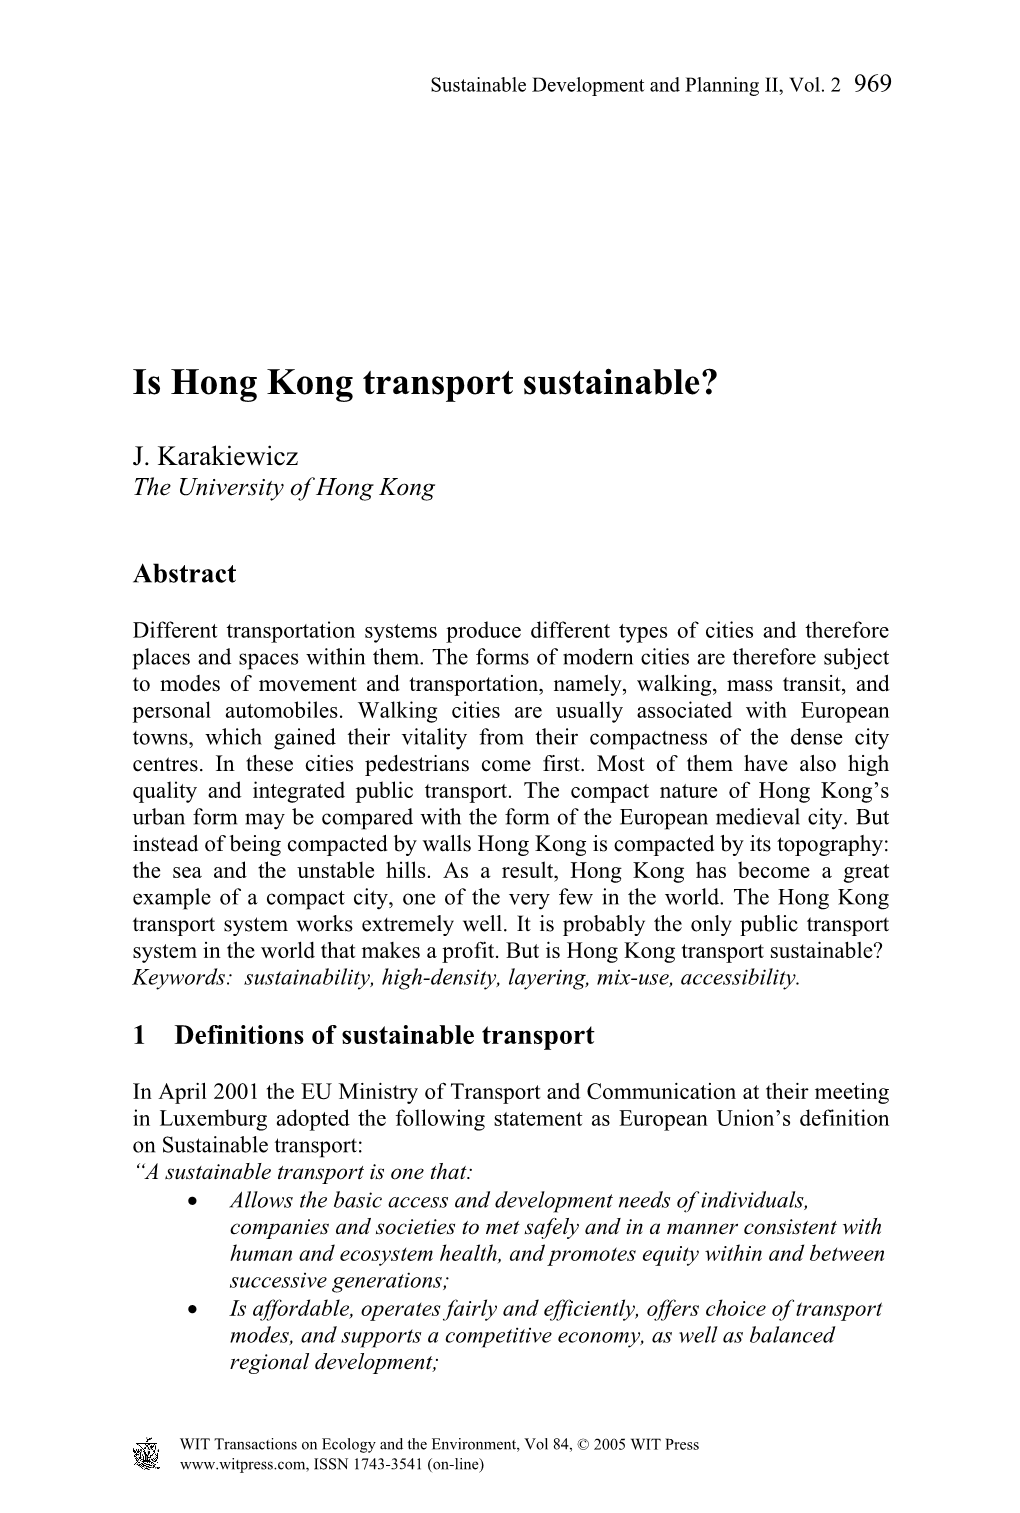 Is Hong Kong Transport Sustainable?